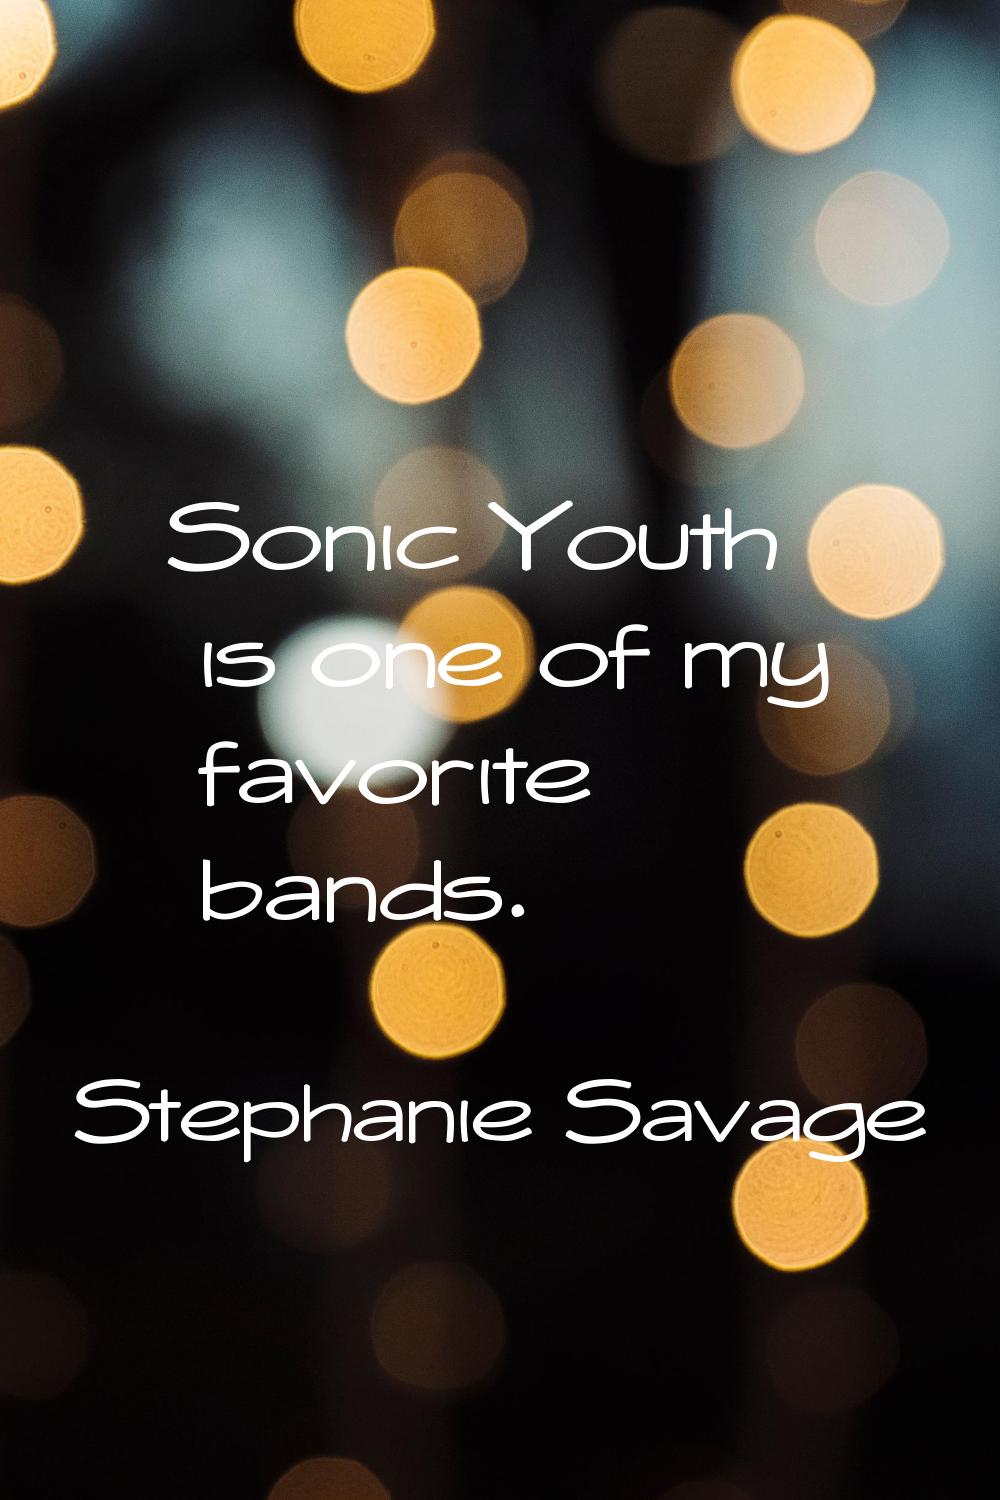 Sonic Youth is one of my favorite bands.